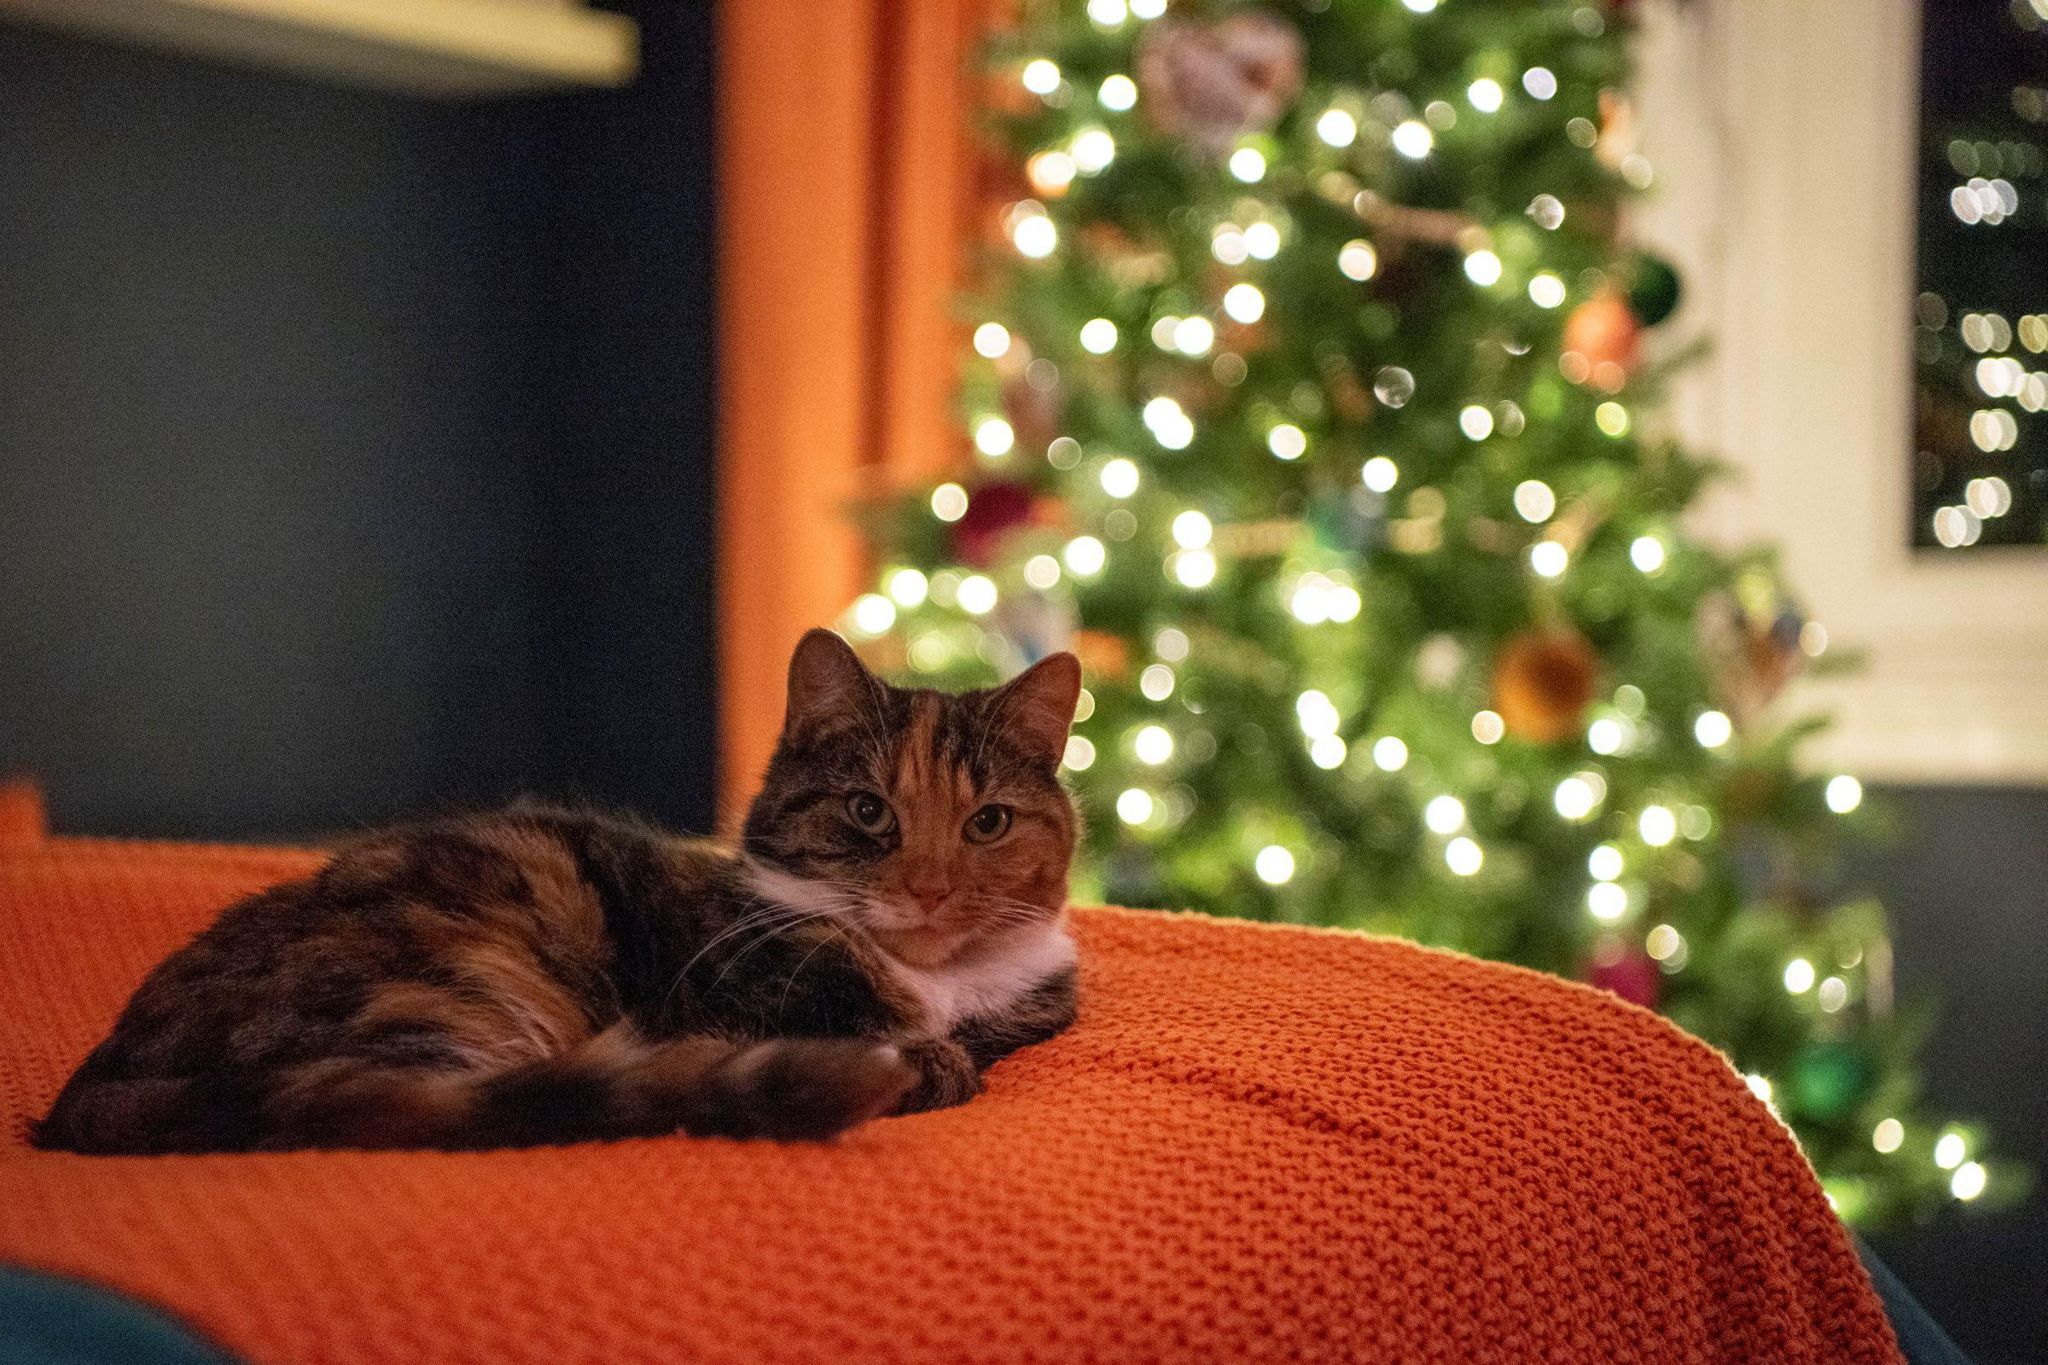 A cat on a bed in front of a Christmas tree